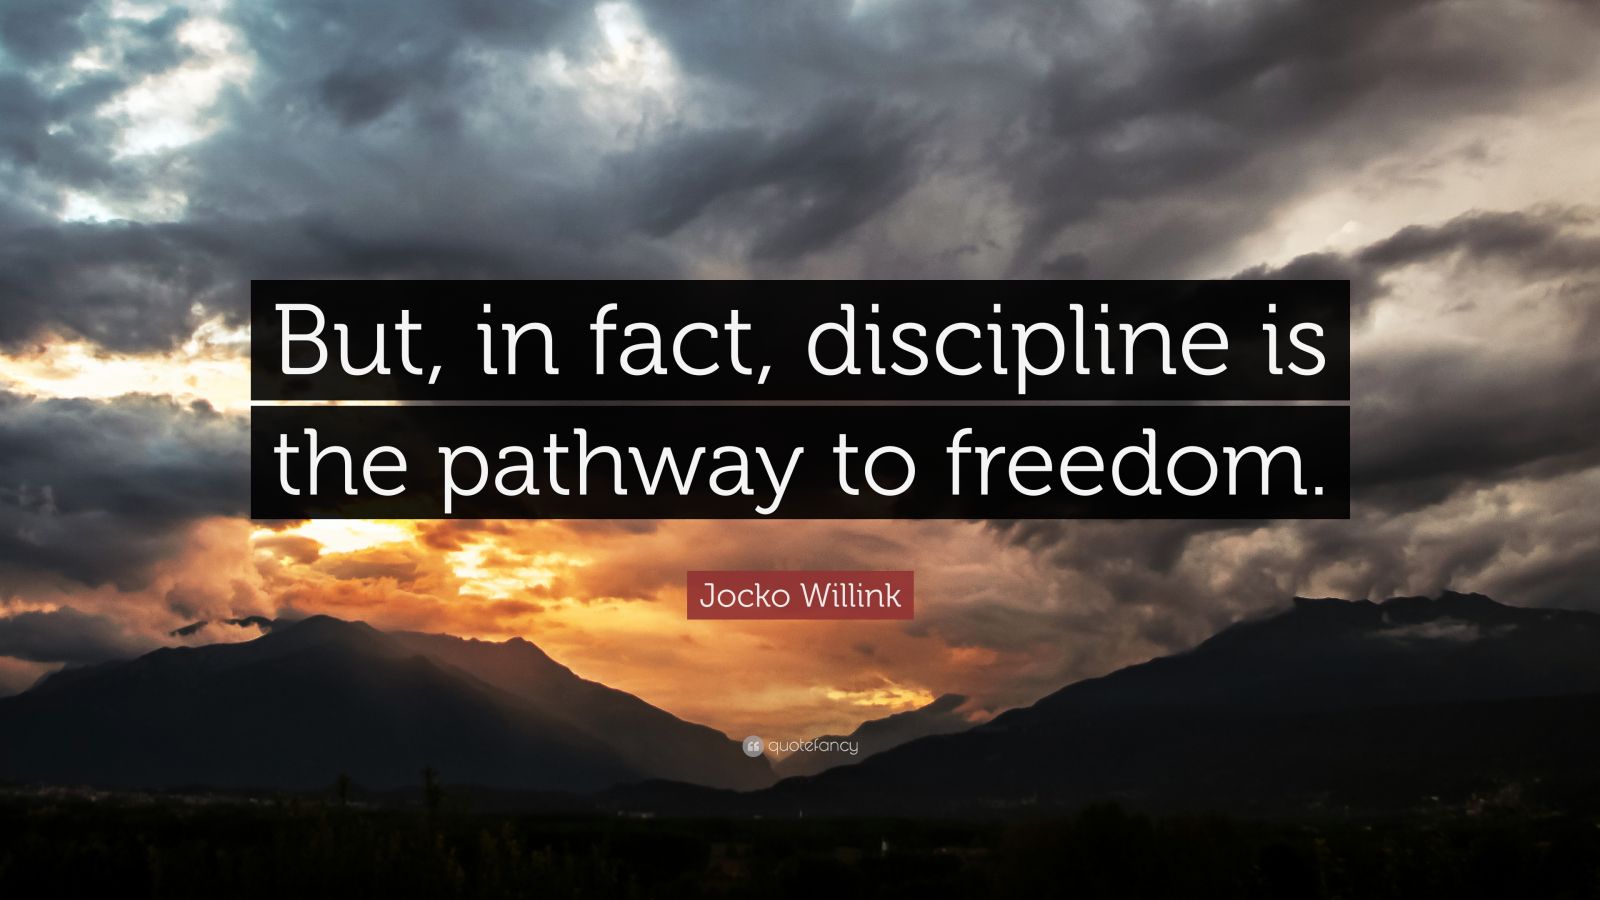 Top 80 Jocko Willink Quotes | 2021 Edition | Free Images - Quotefancy